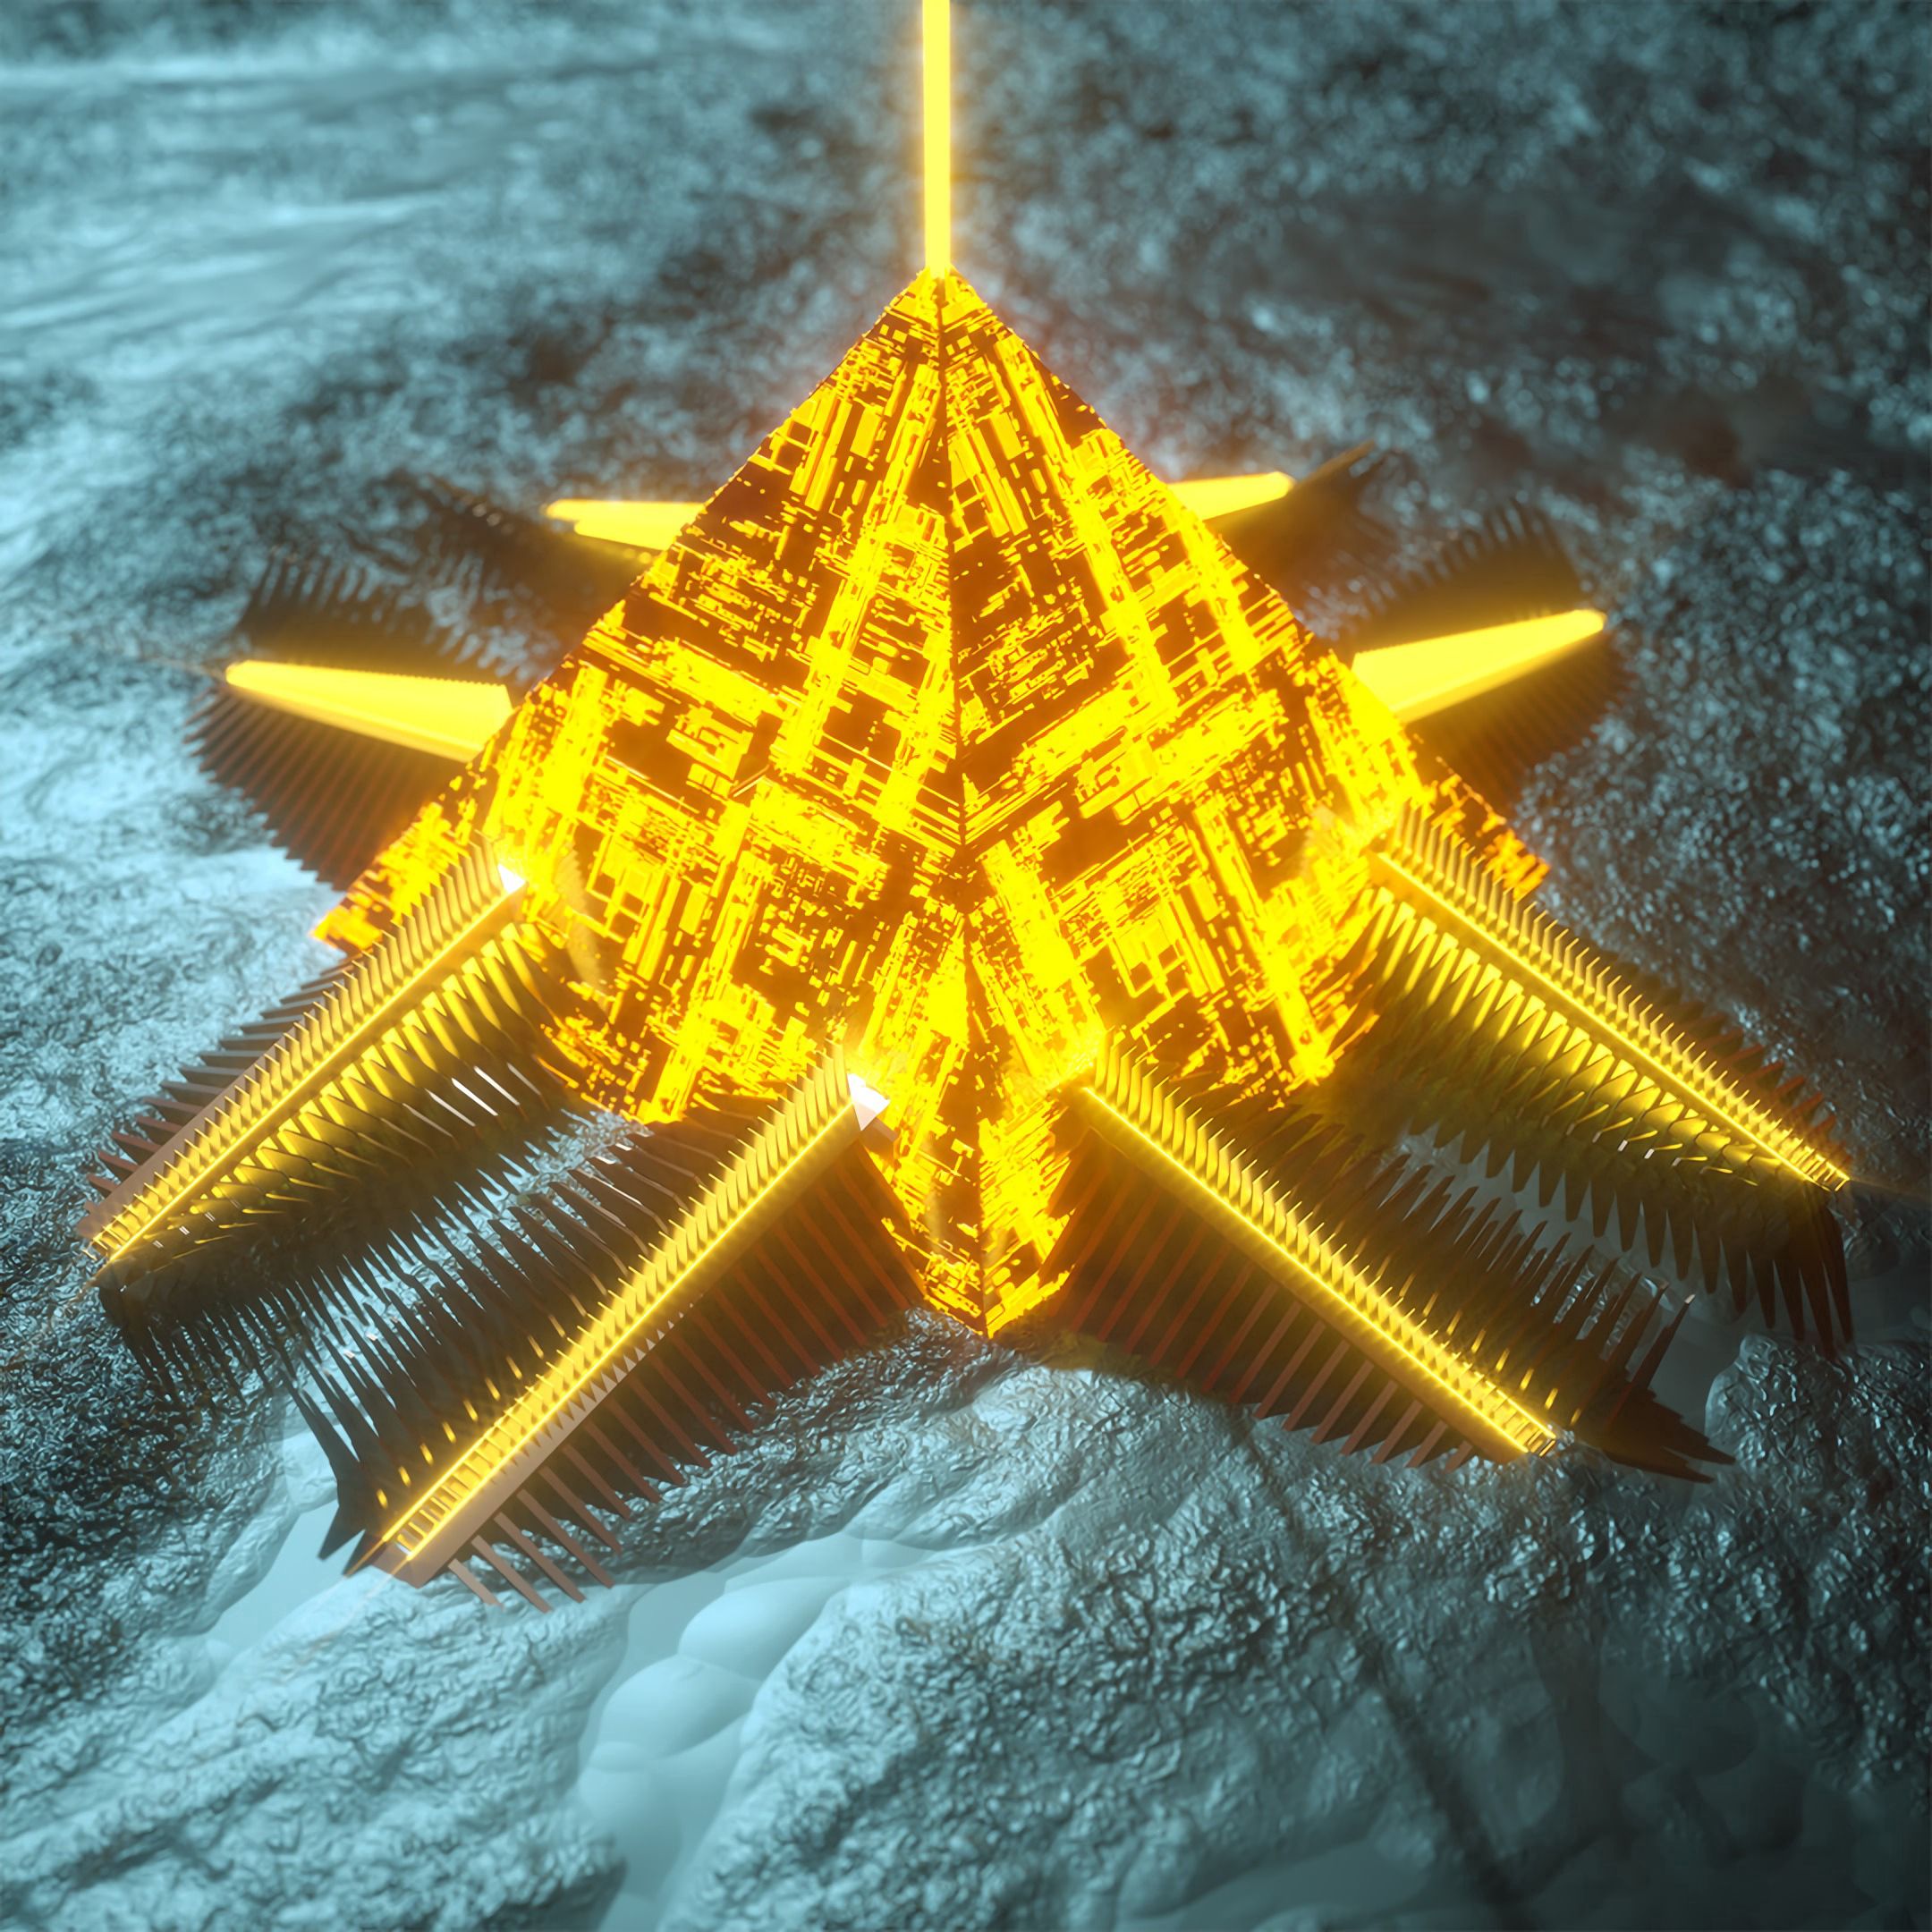 glow, 3d, neon, bright, pyramid images